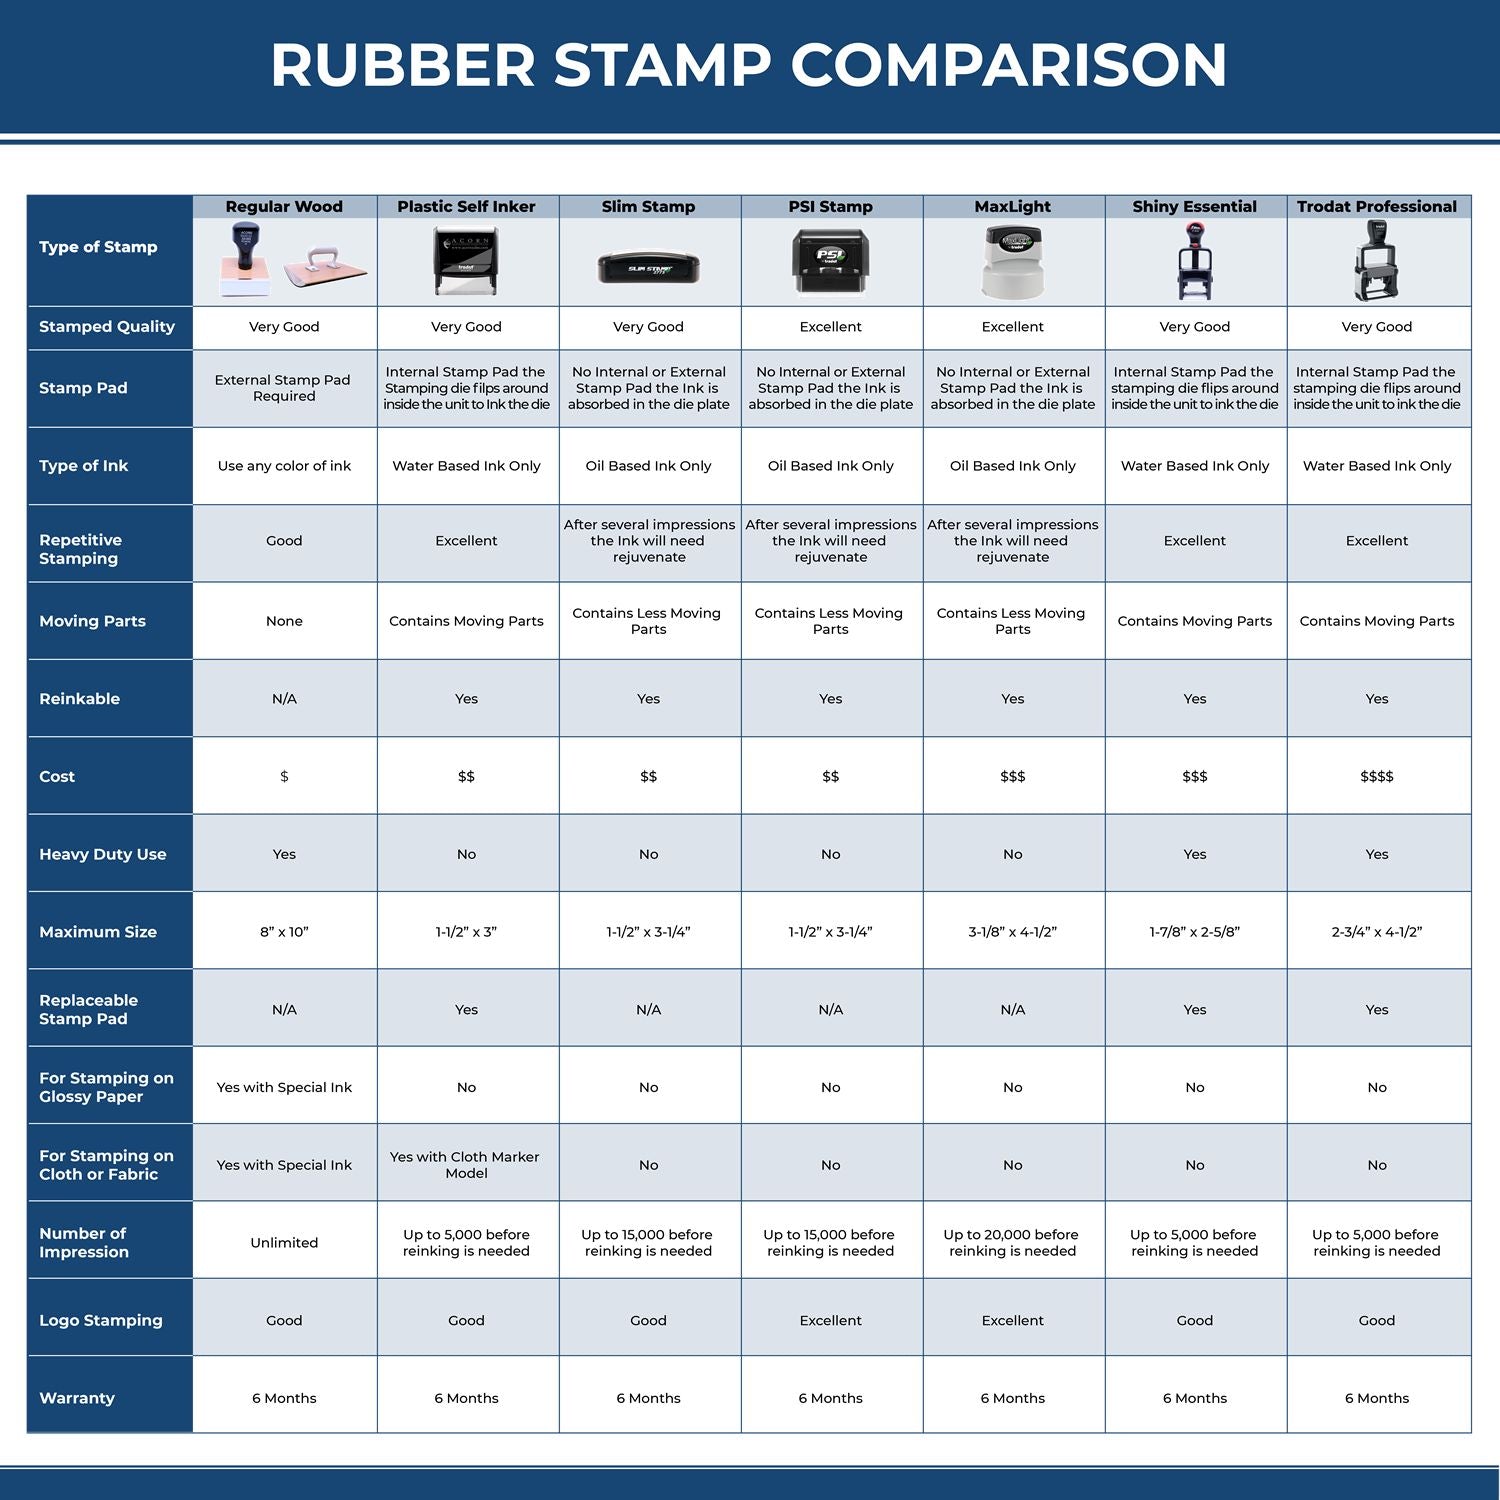 Large Self Inking Duplicate Stamp 4120S Rubber Stamp Comparison